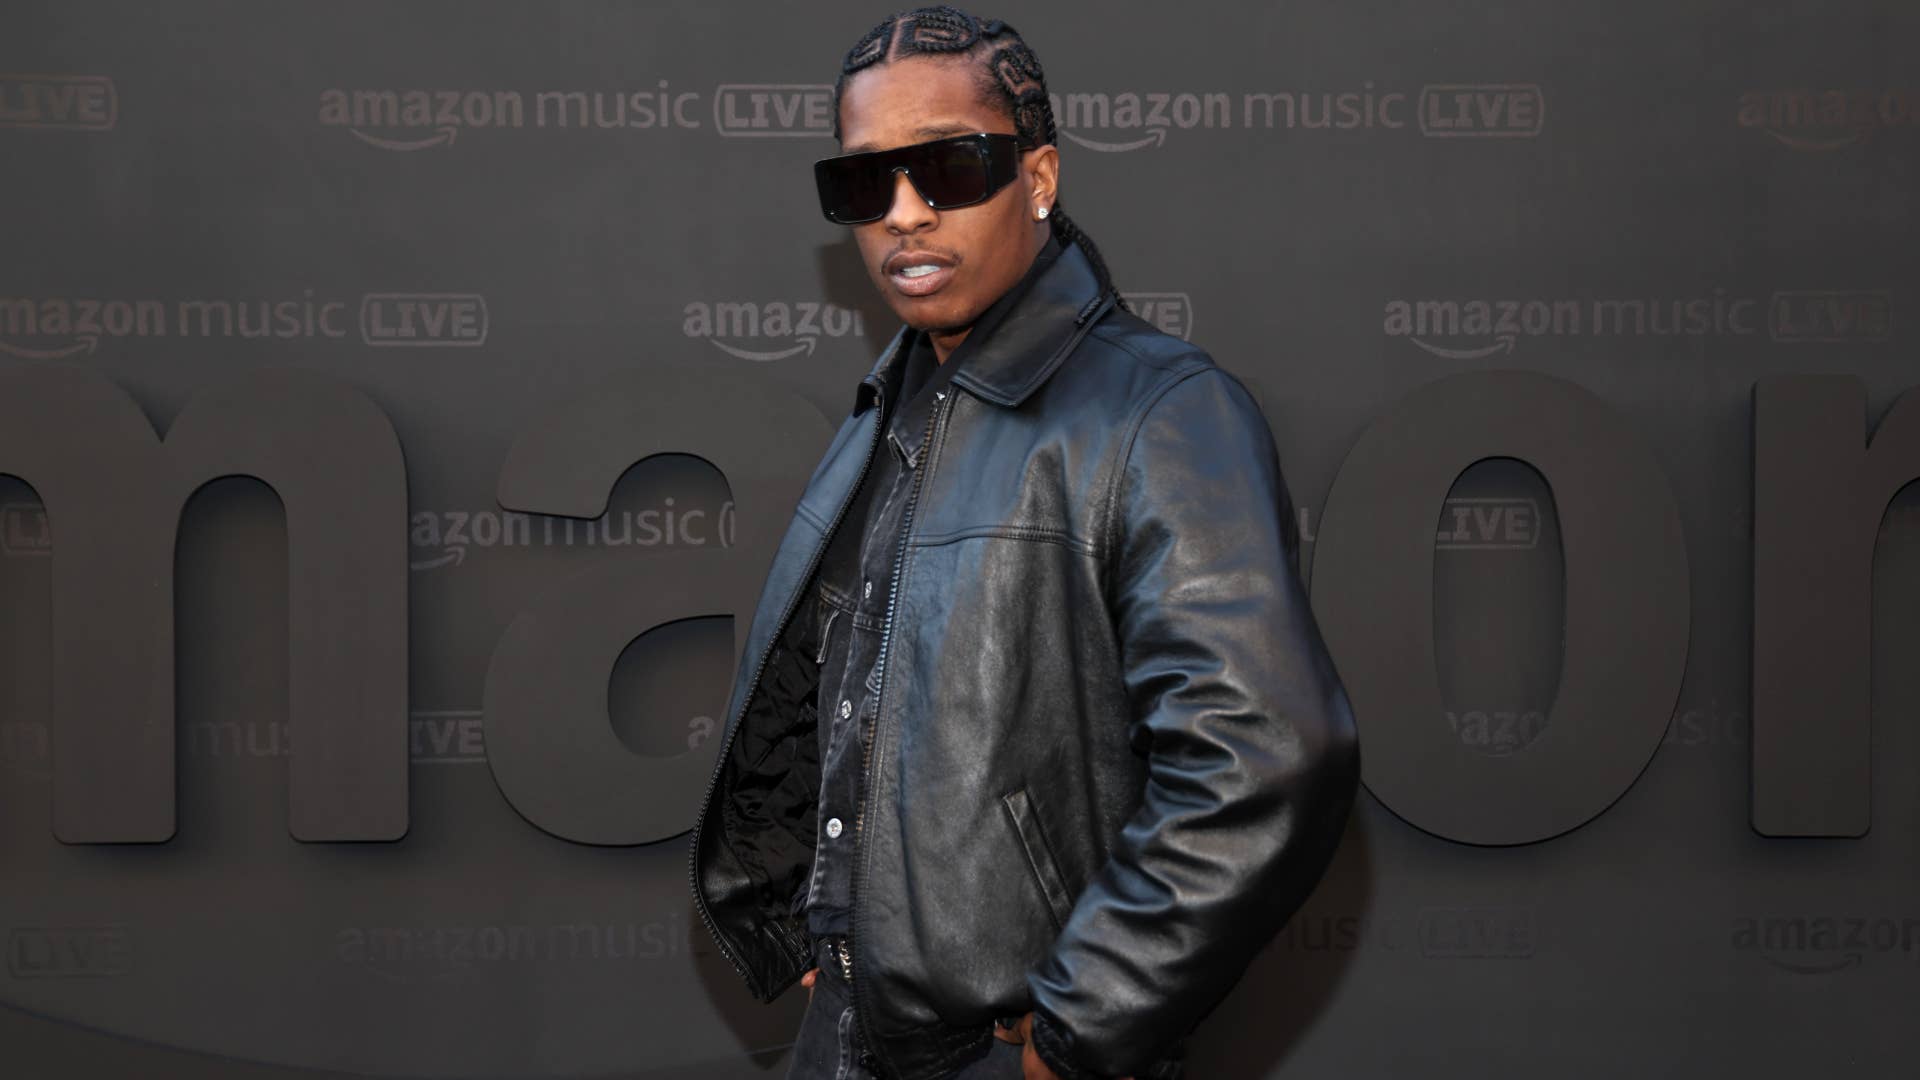 ASAP Rocky is seen at Amazon Music Live red carpet